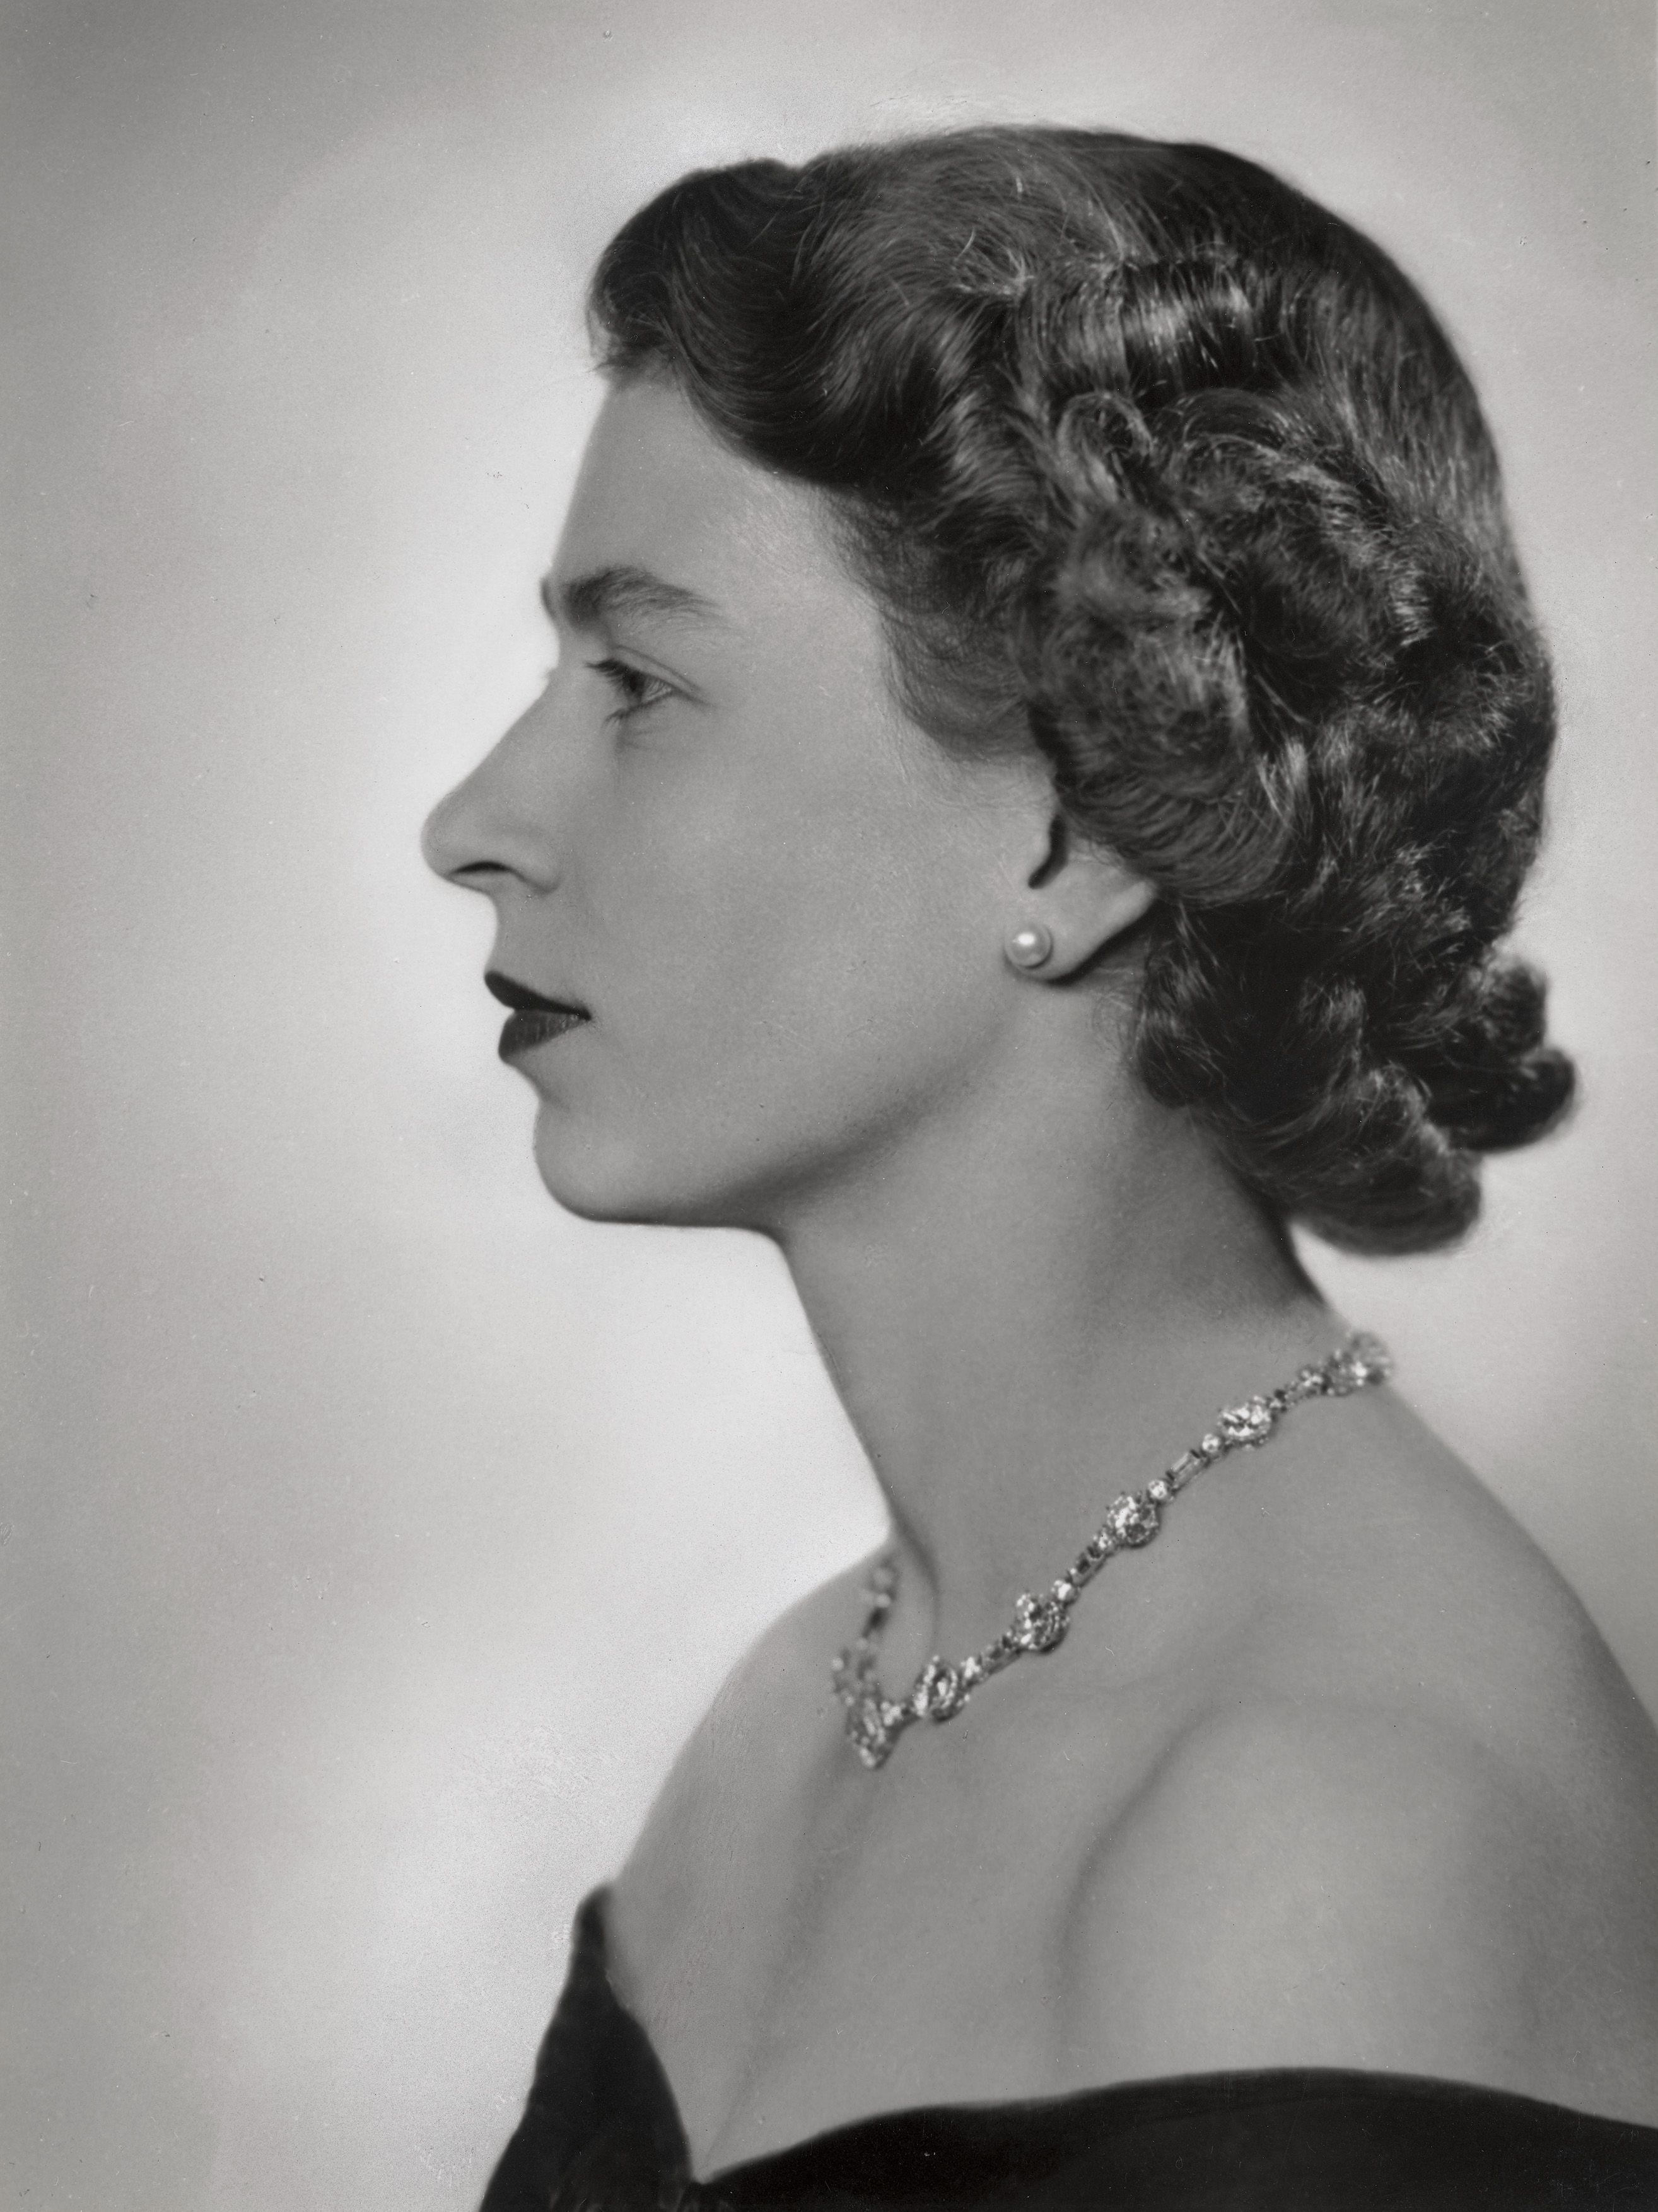 First Official Portraits of Queen Elizabeth From 1952 — Photos